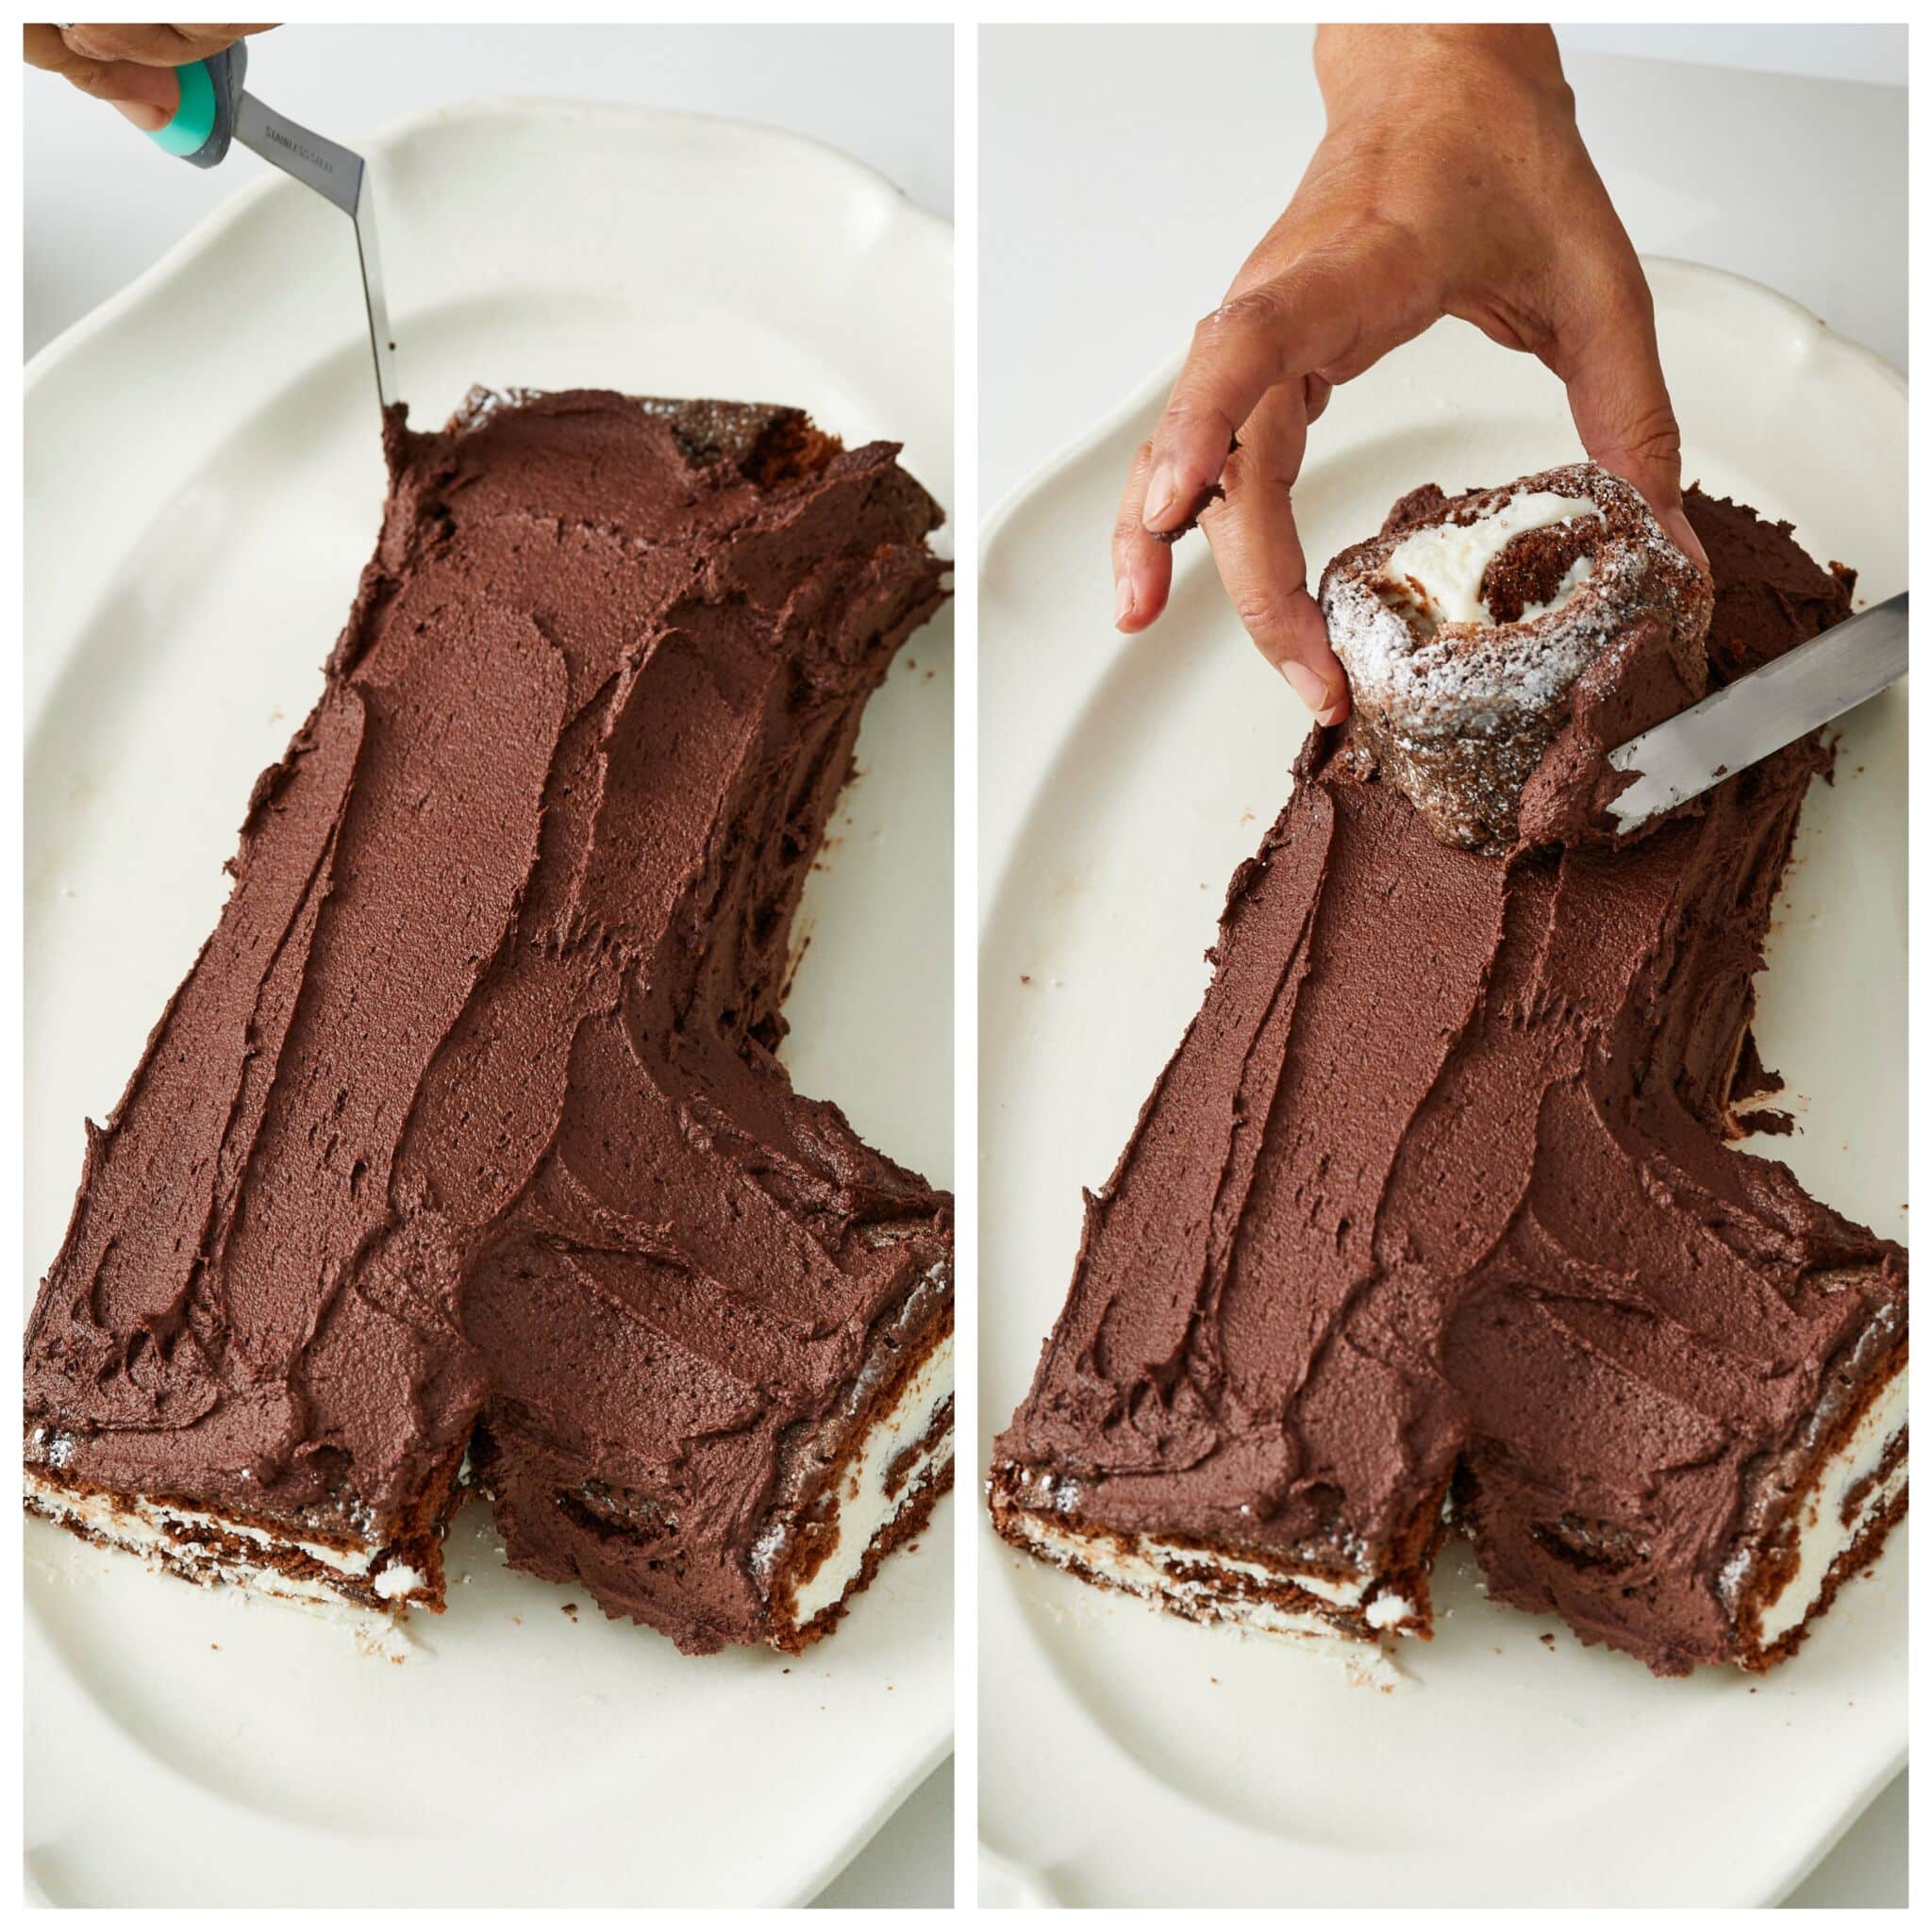 Cut a 10-inch piece of the cake and place it seam-side down on a serving platter. Cut the remaining piece in half, and use frosting to attach one half upright on the top of the cake and the other on the side. Using the chocolate buttercream, frost the cake to look like a log. Garnish with Meringue Mushrooms (pipe meringue into mushroom stems and mushroom caps) and powdered sugar. 